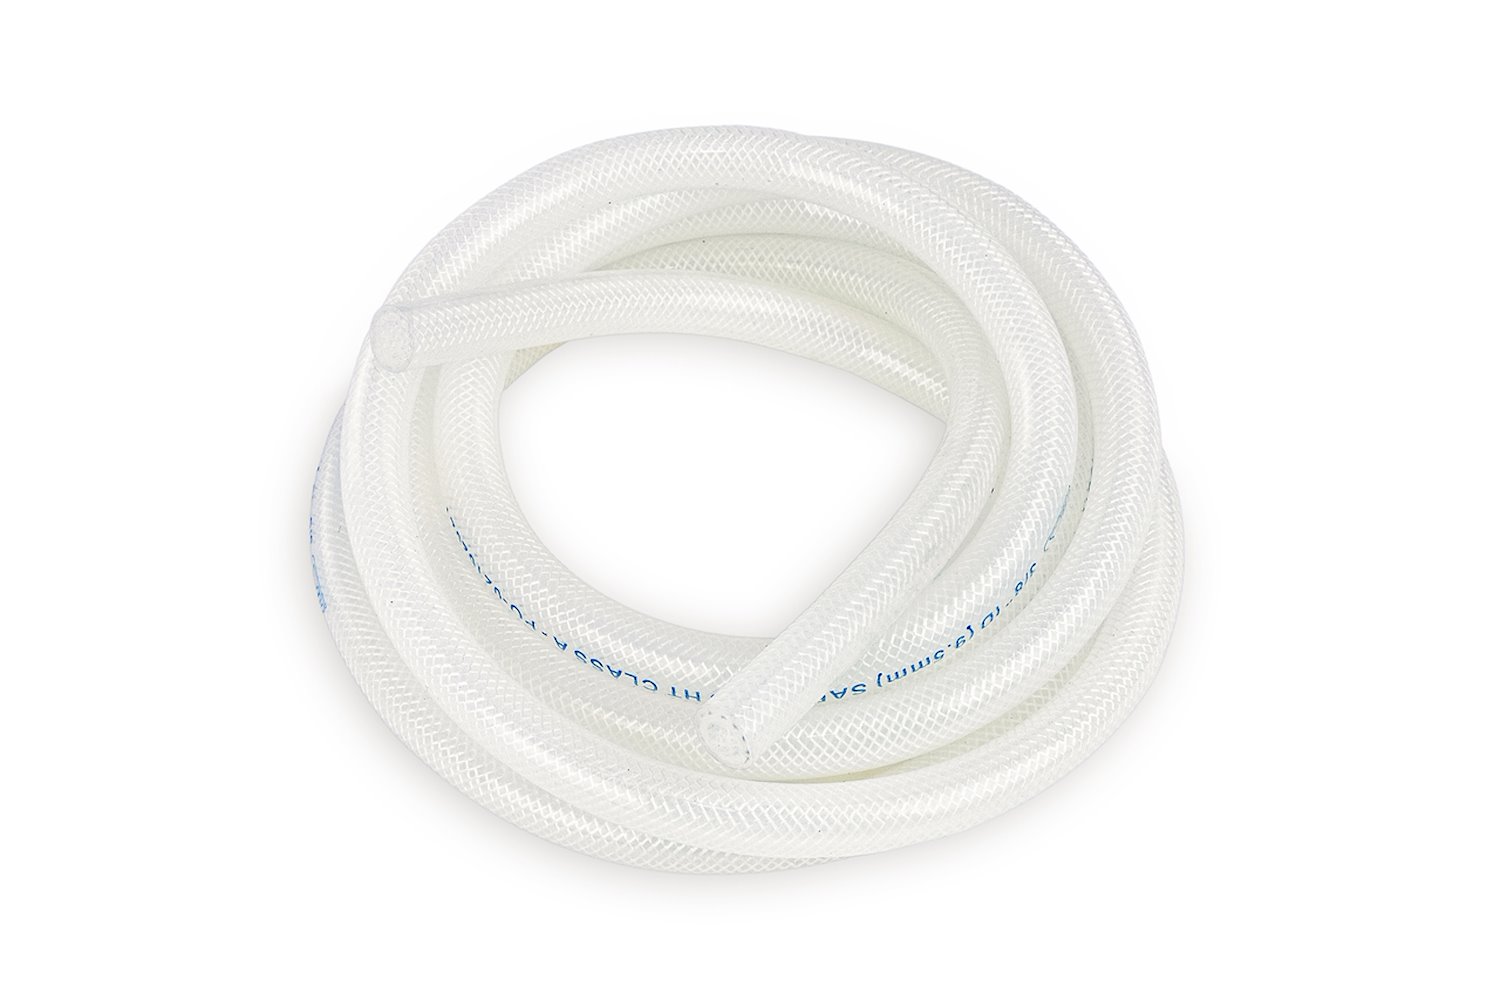 HTHH-038-CLEARx10 Silicone Heater Hose Tubing, High-Temp Reinforced, 3/8 in. ID, 10 ft. Roll, Clear